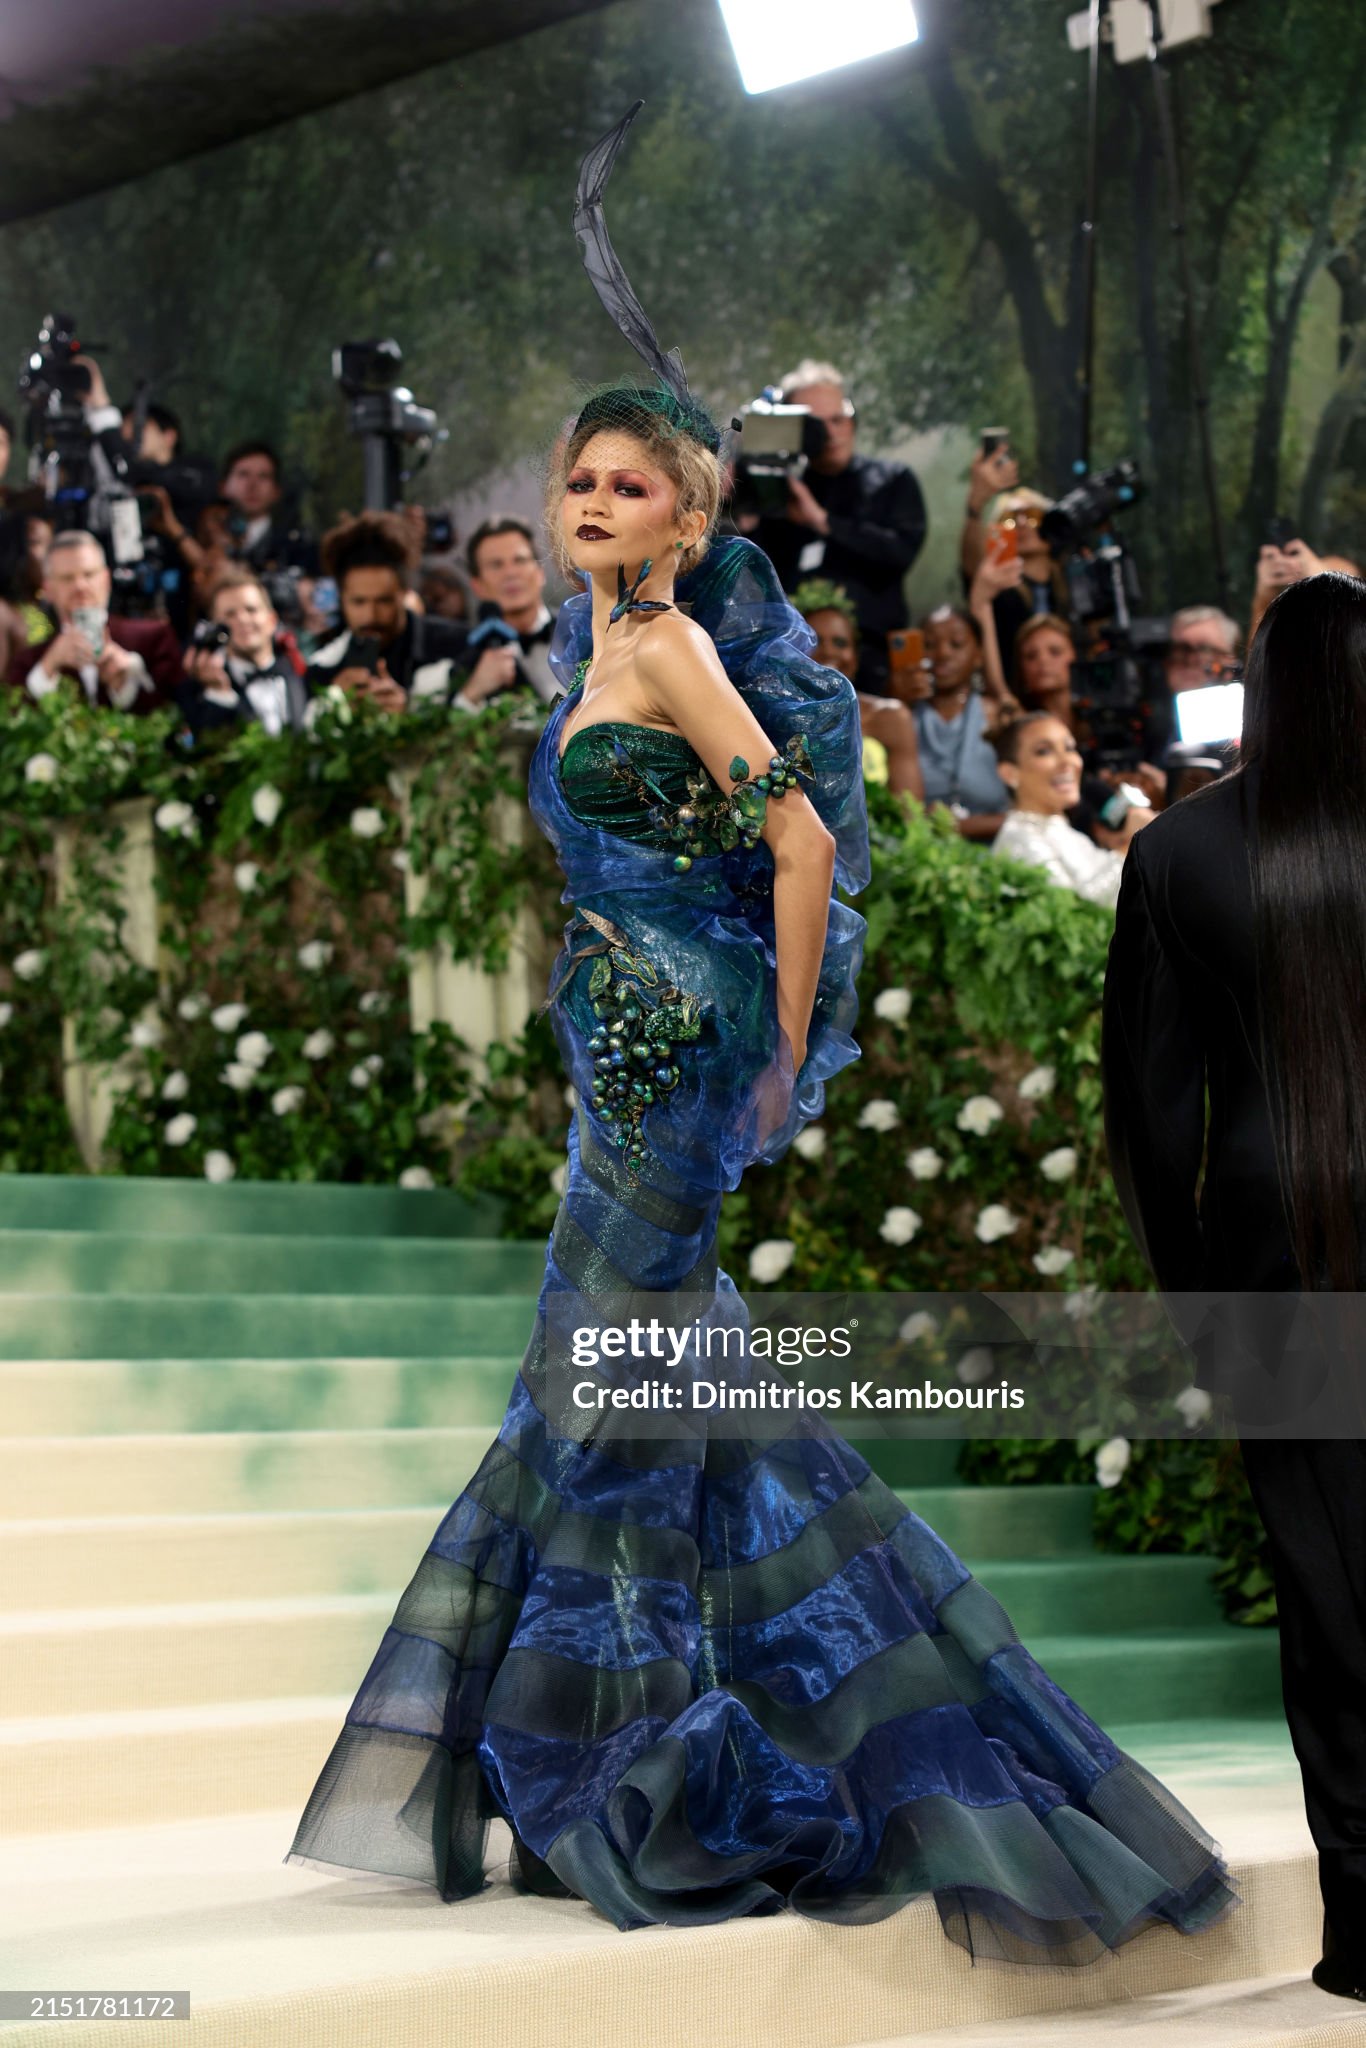 gettyimages-2151781172-2048x2048.jpg